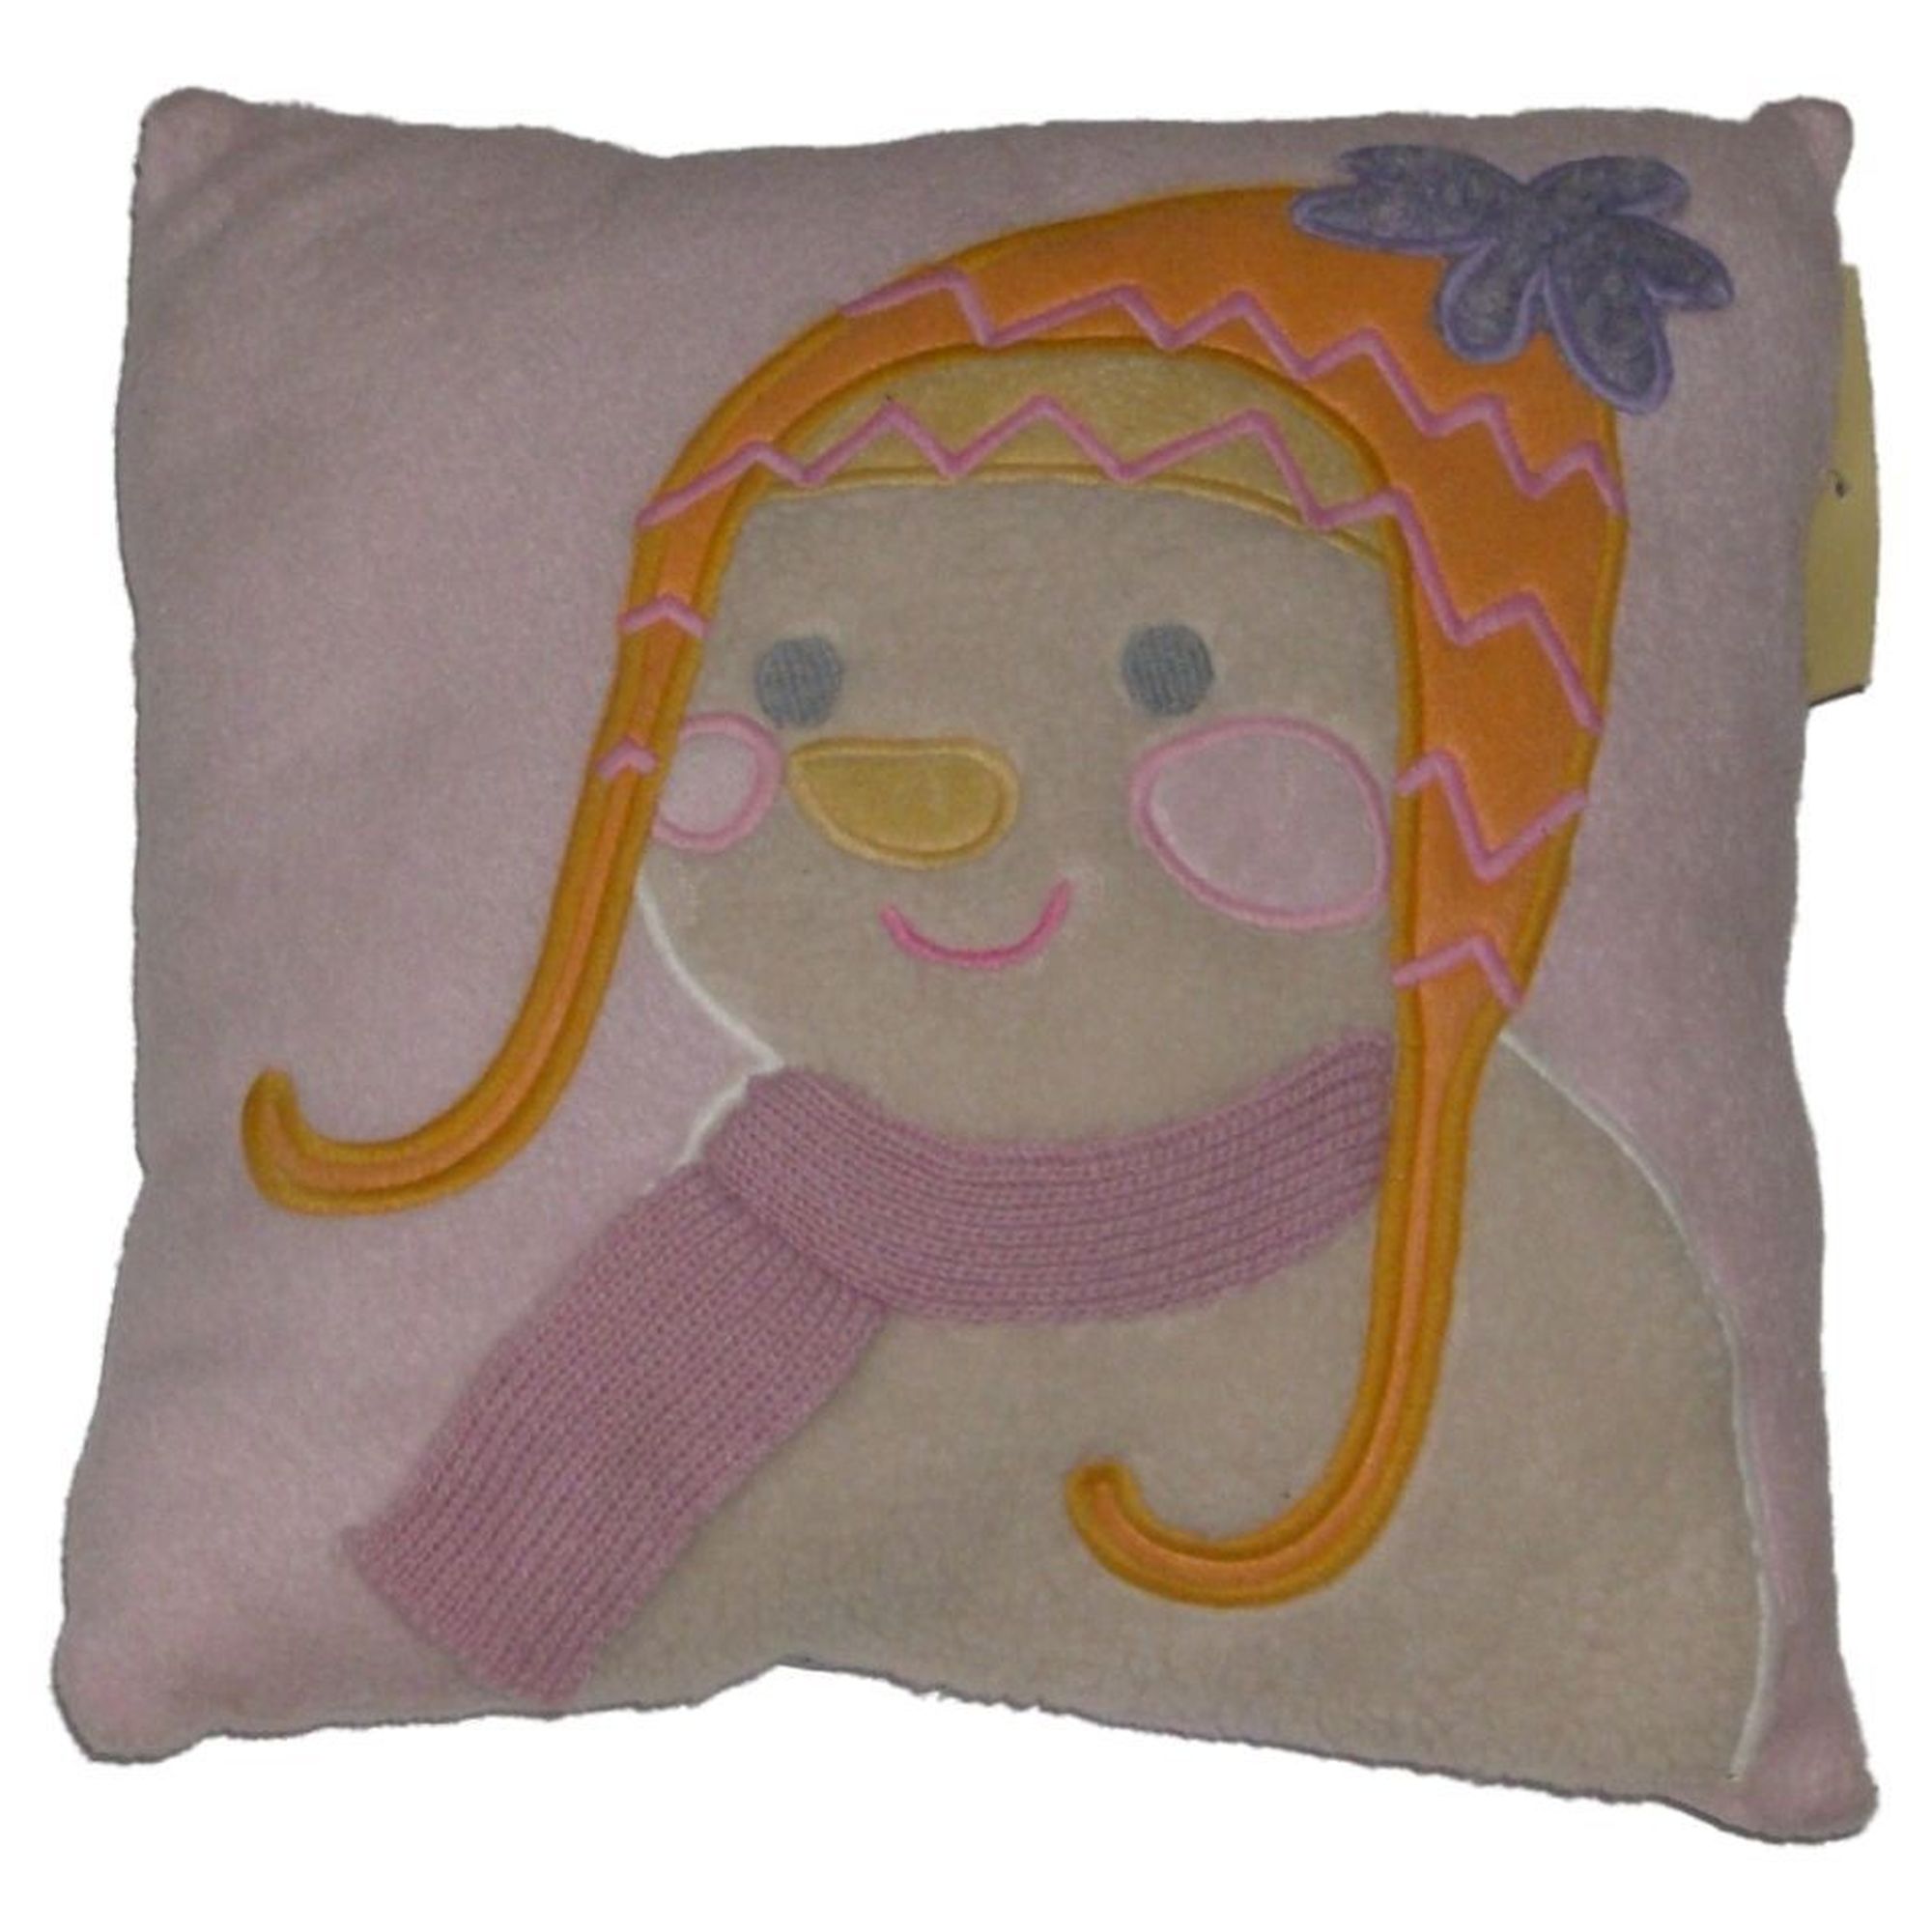 Restore & Restyle Kids Pink Snowman Throw Pillow Holiday Toss Accent Cushion